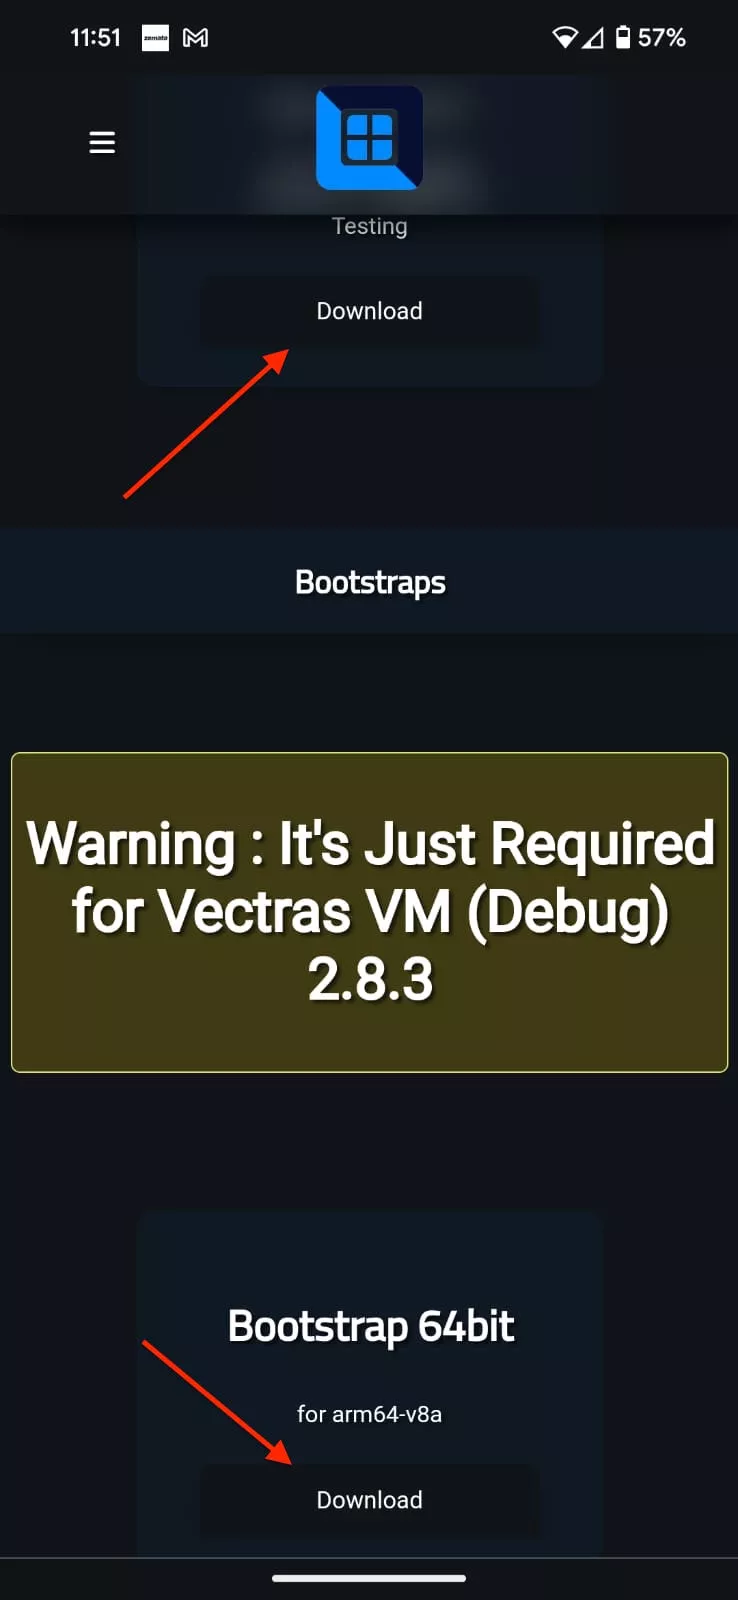 Screenshot of the download page of VectrasVM